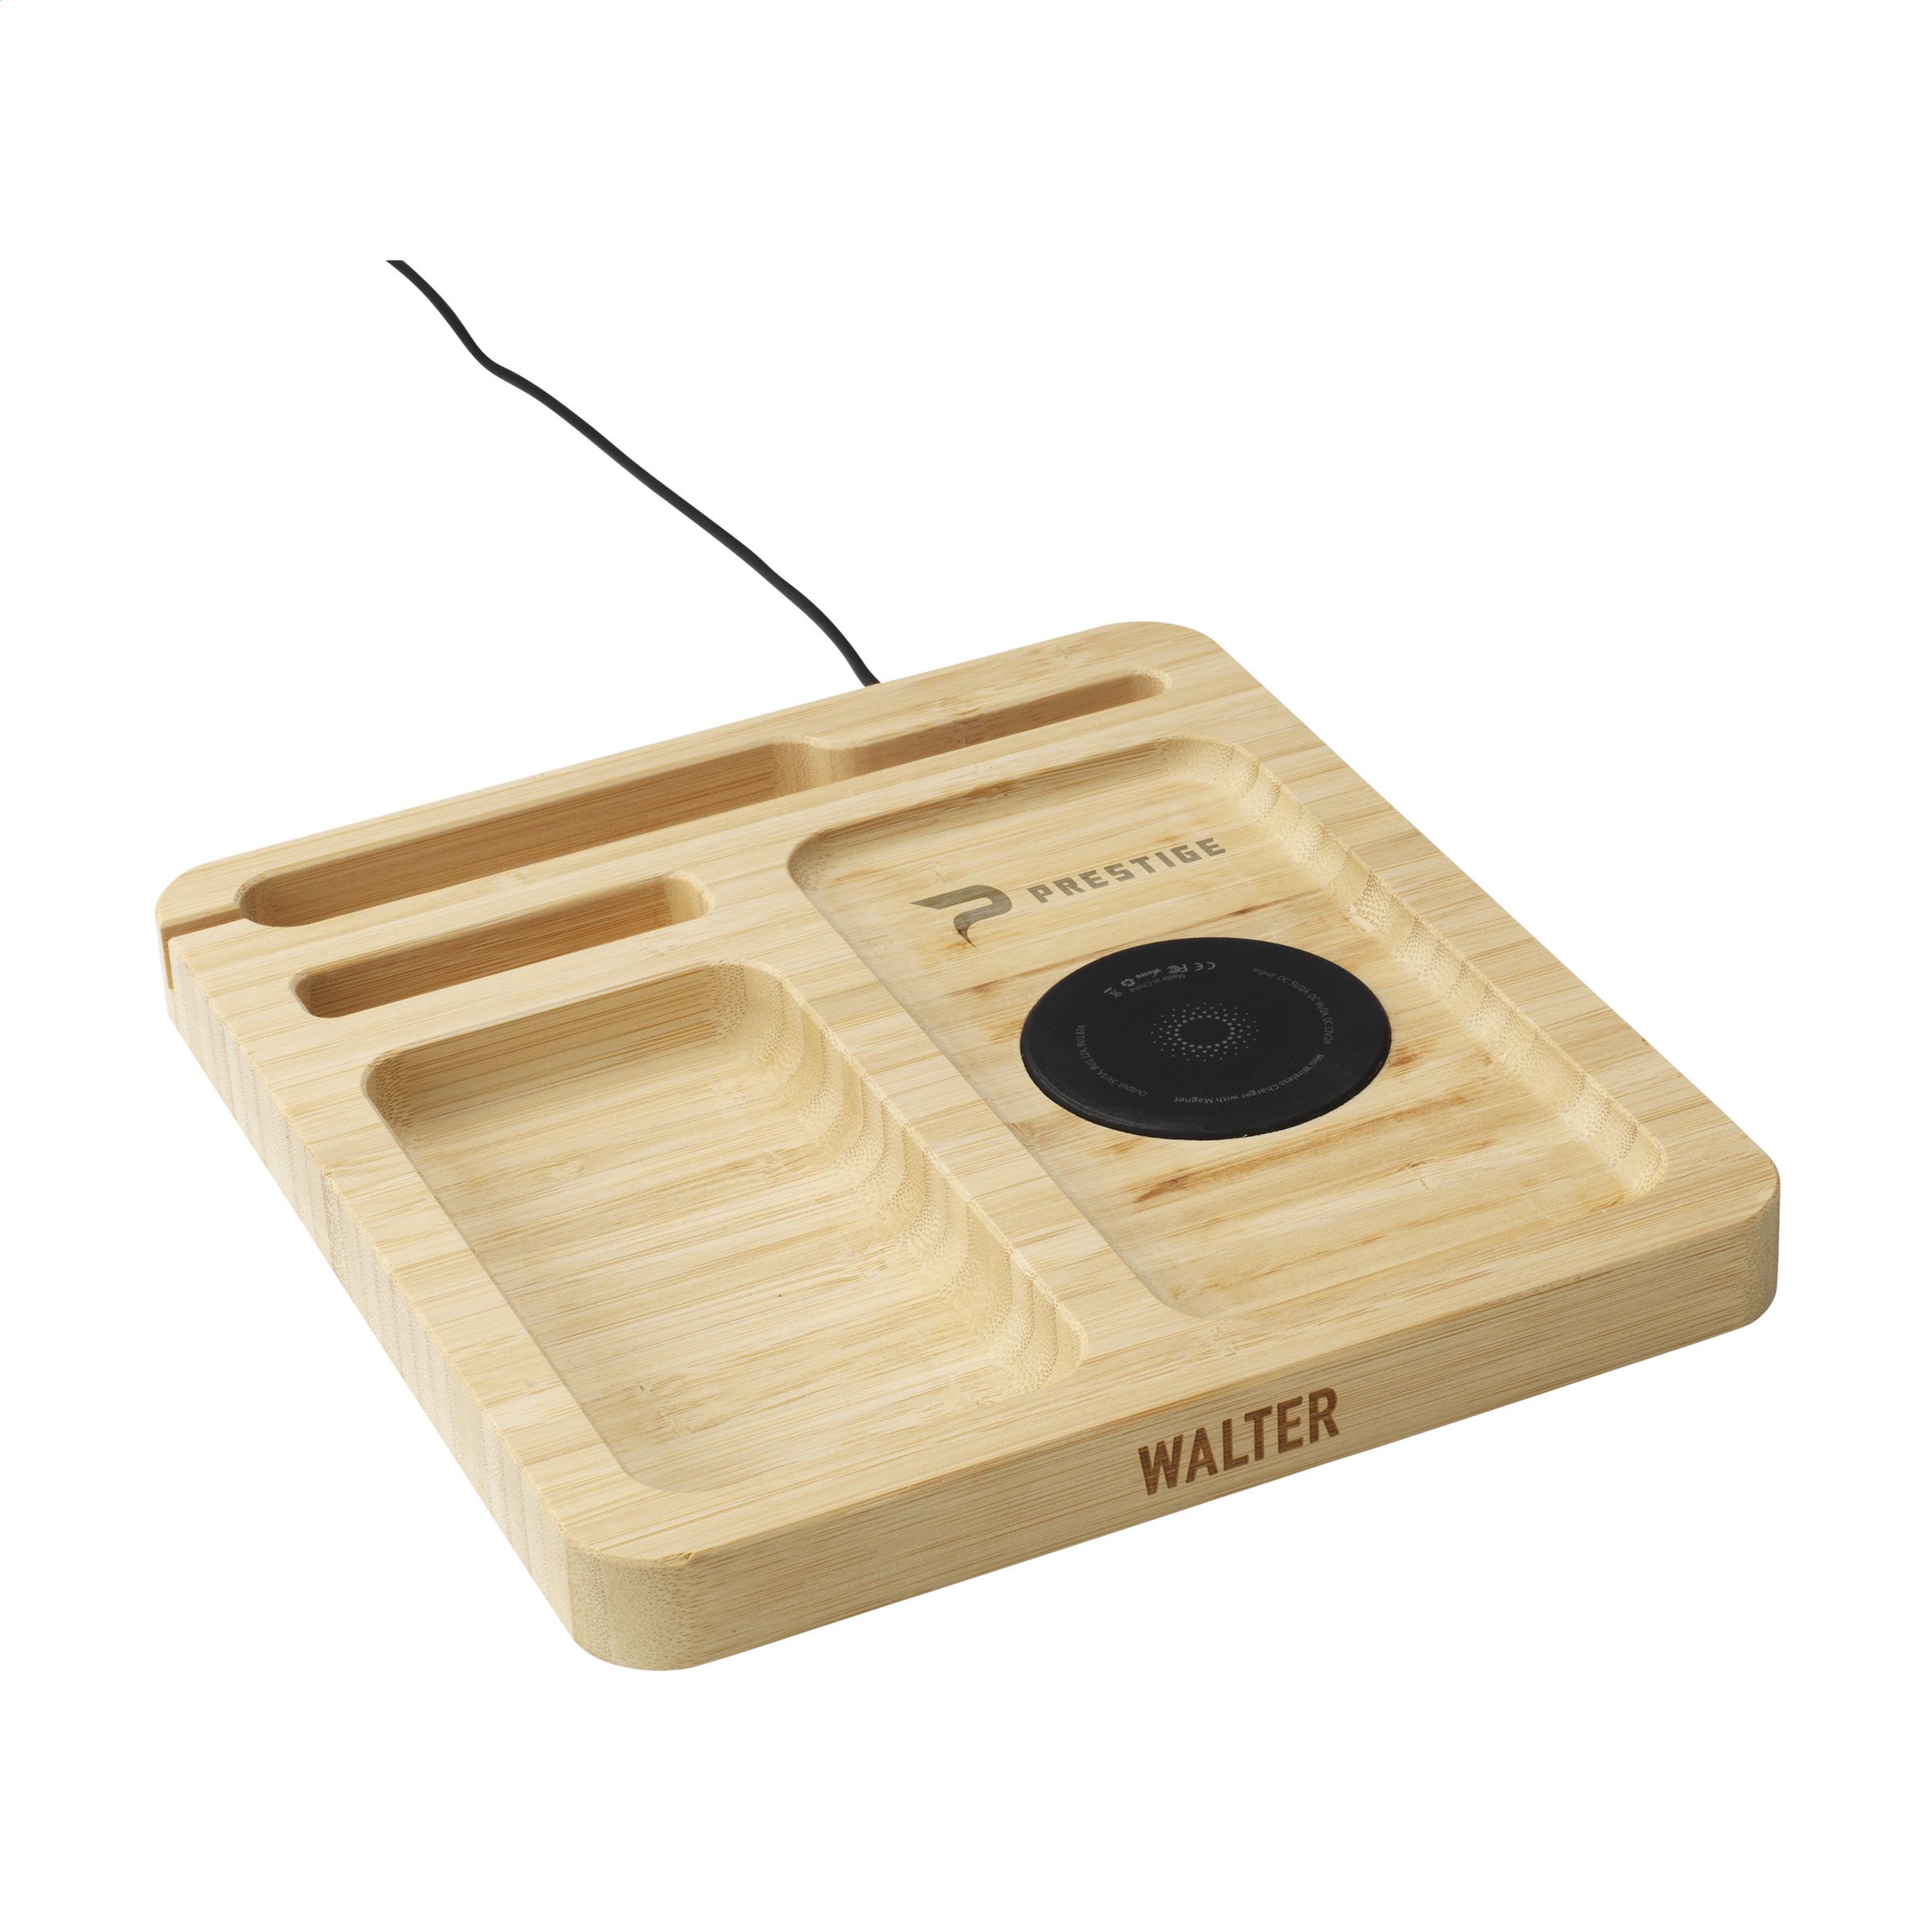 Bamboo Desk Organizer and Wireless Charger - Thrumpton - Brentwood